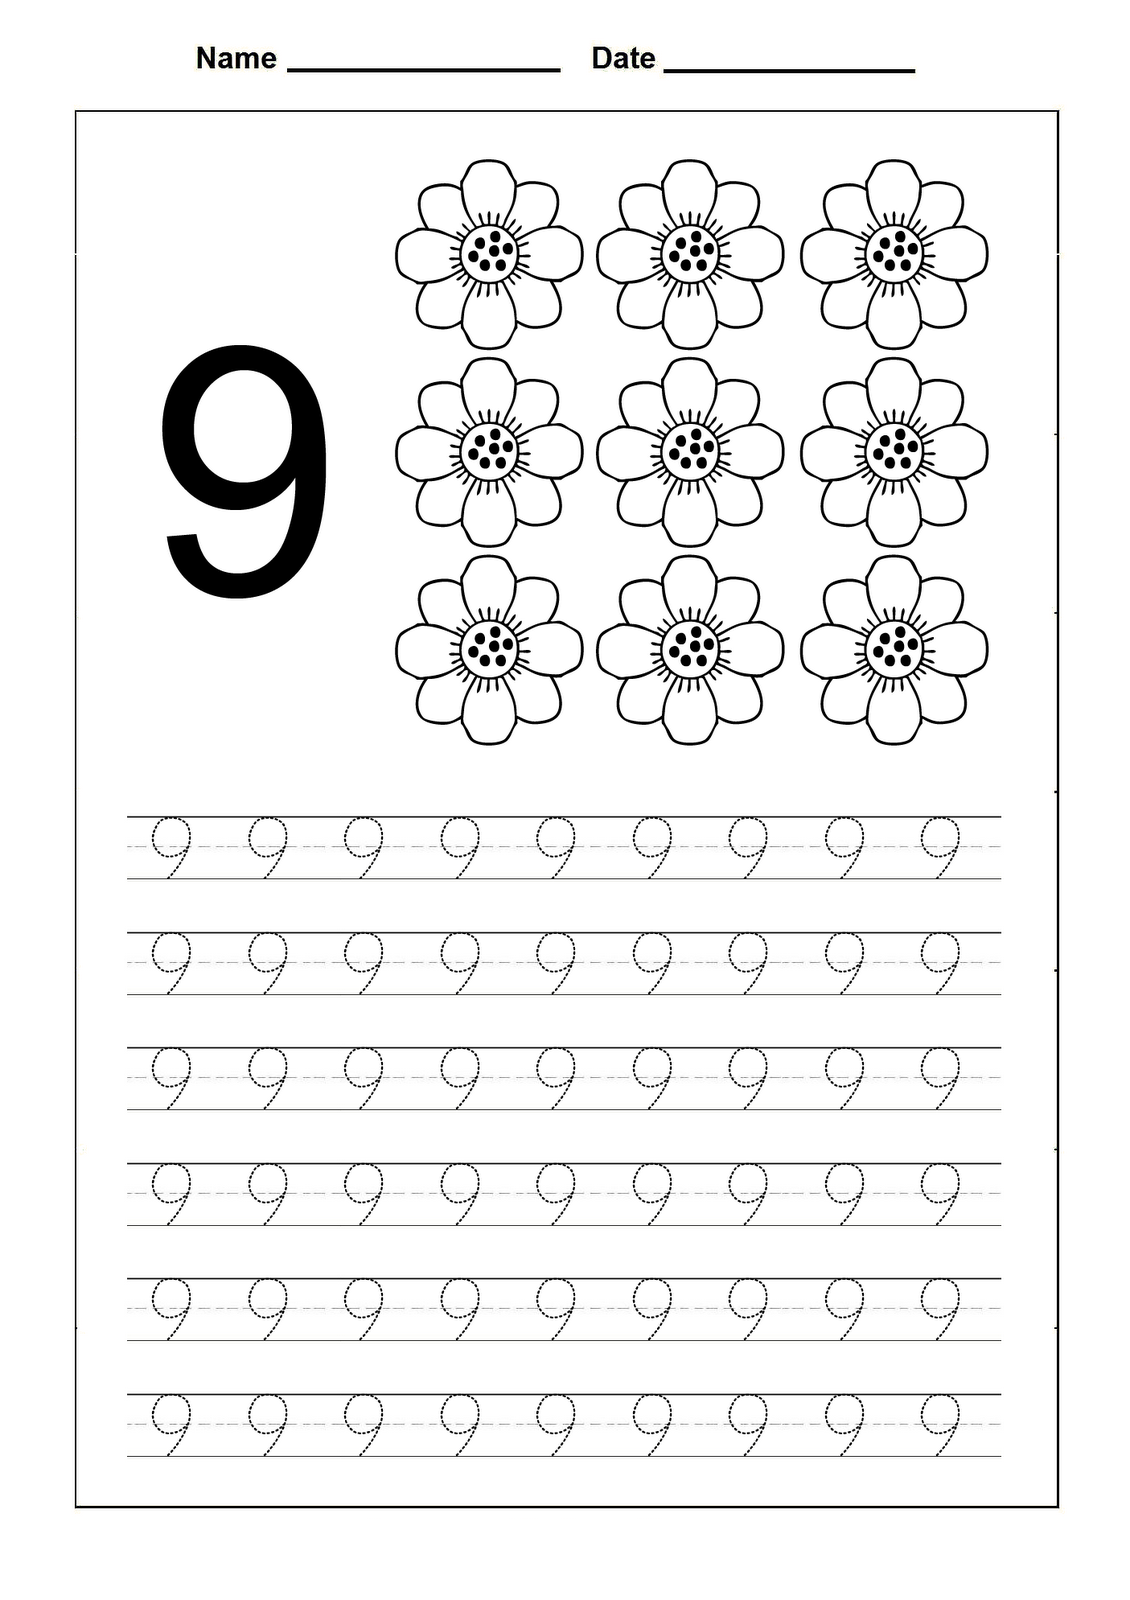 This Is A Numbers Tracing Worksheet For Preschoolers Or